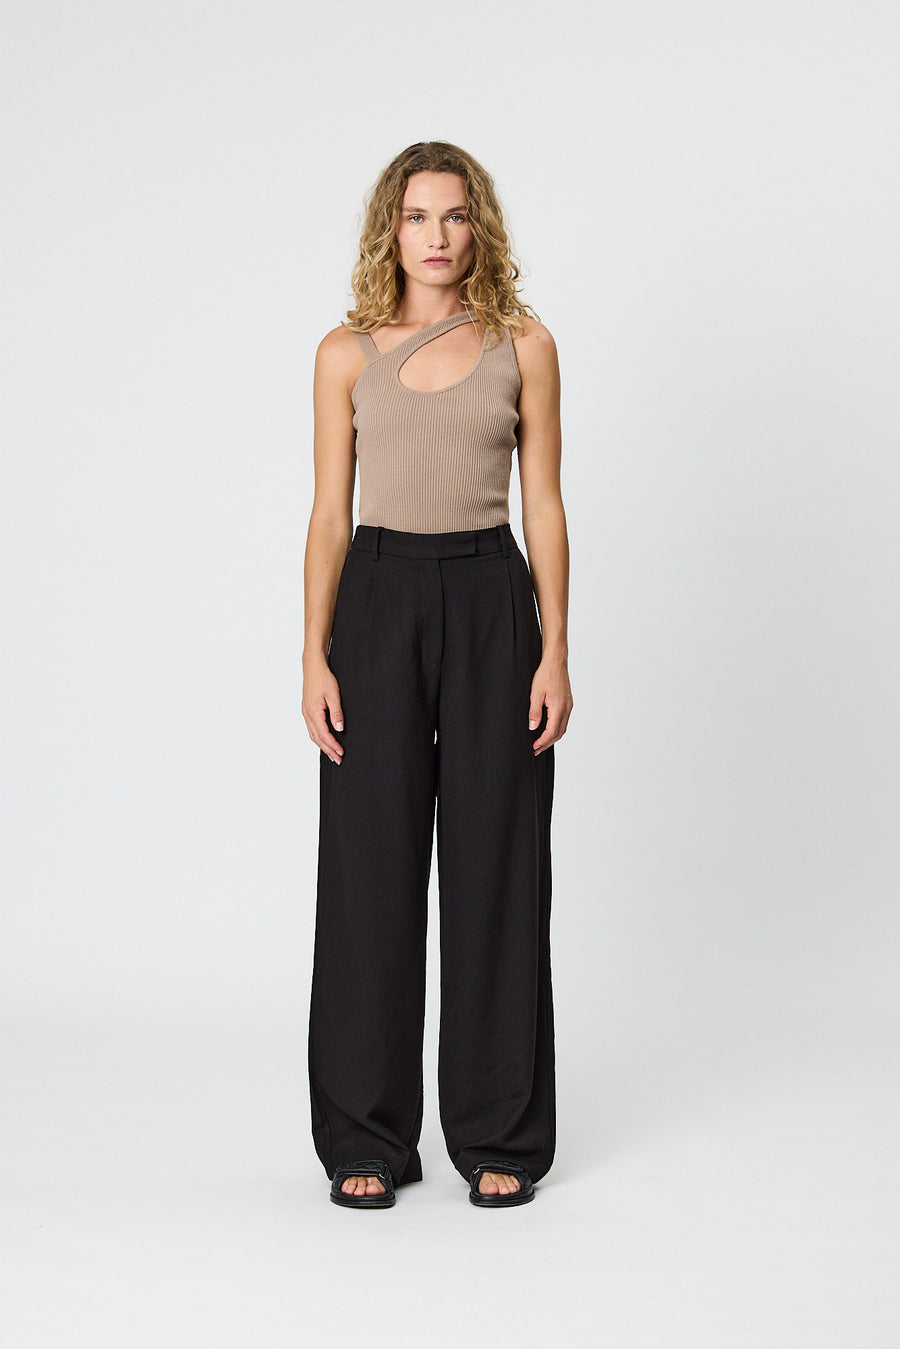 EVIE TAILORED PANTS - BLACK – Remain